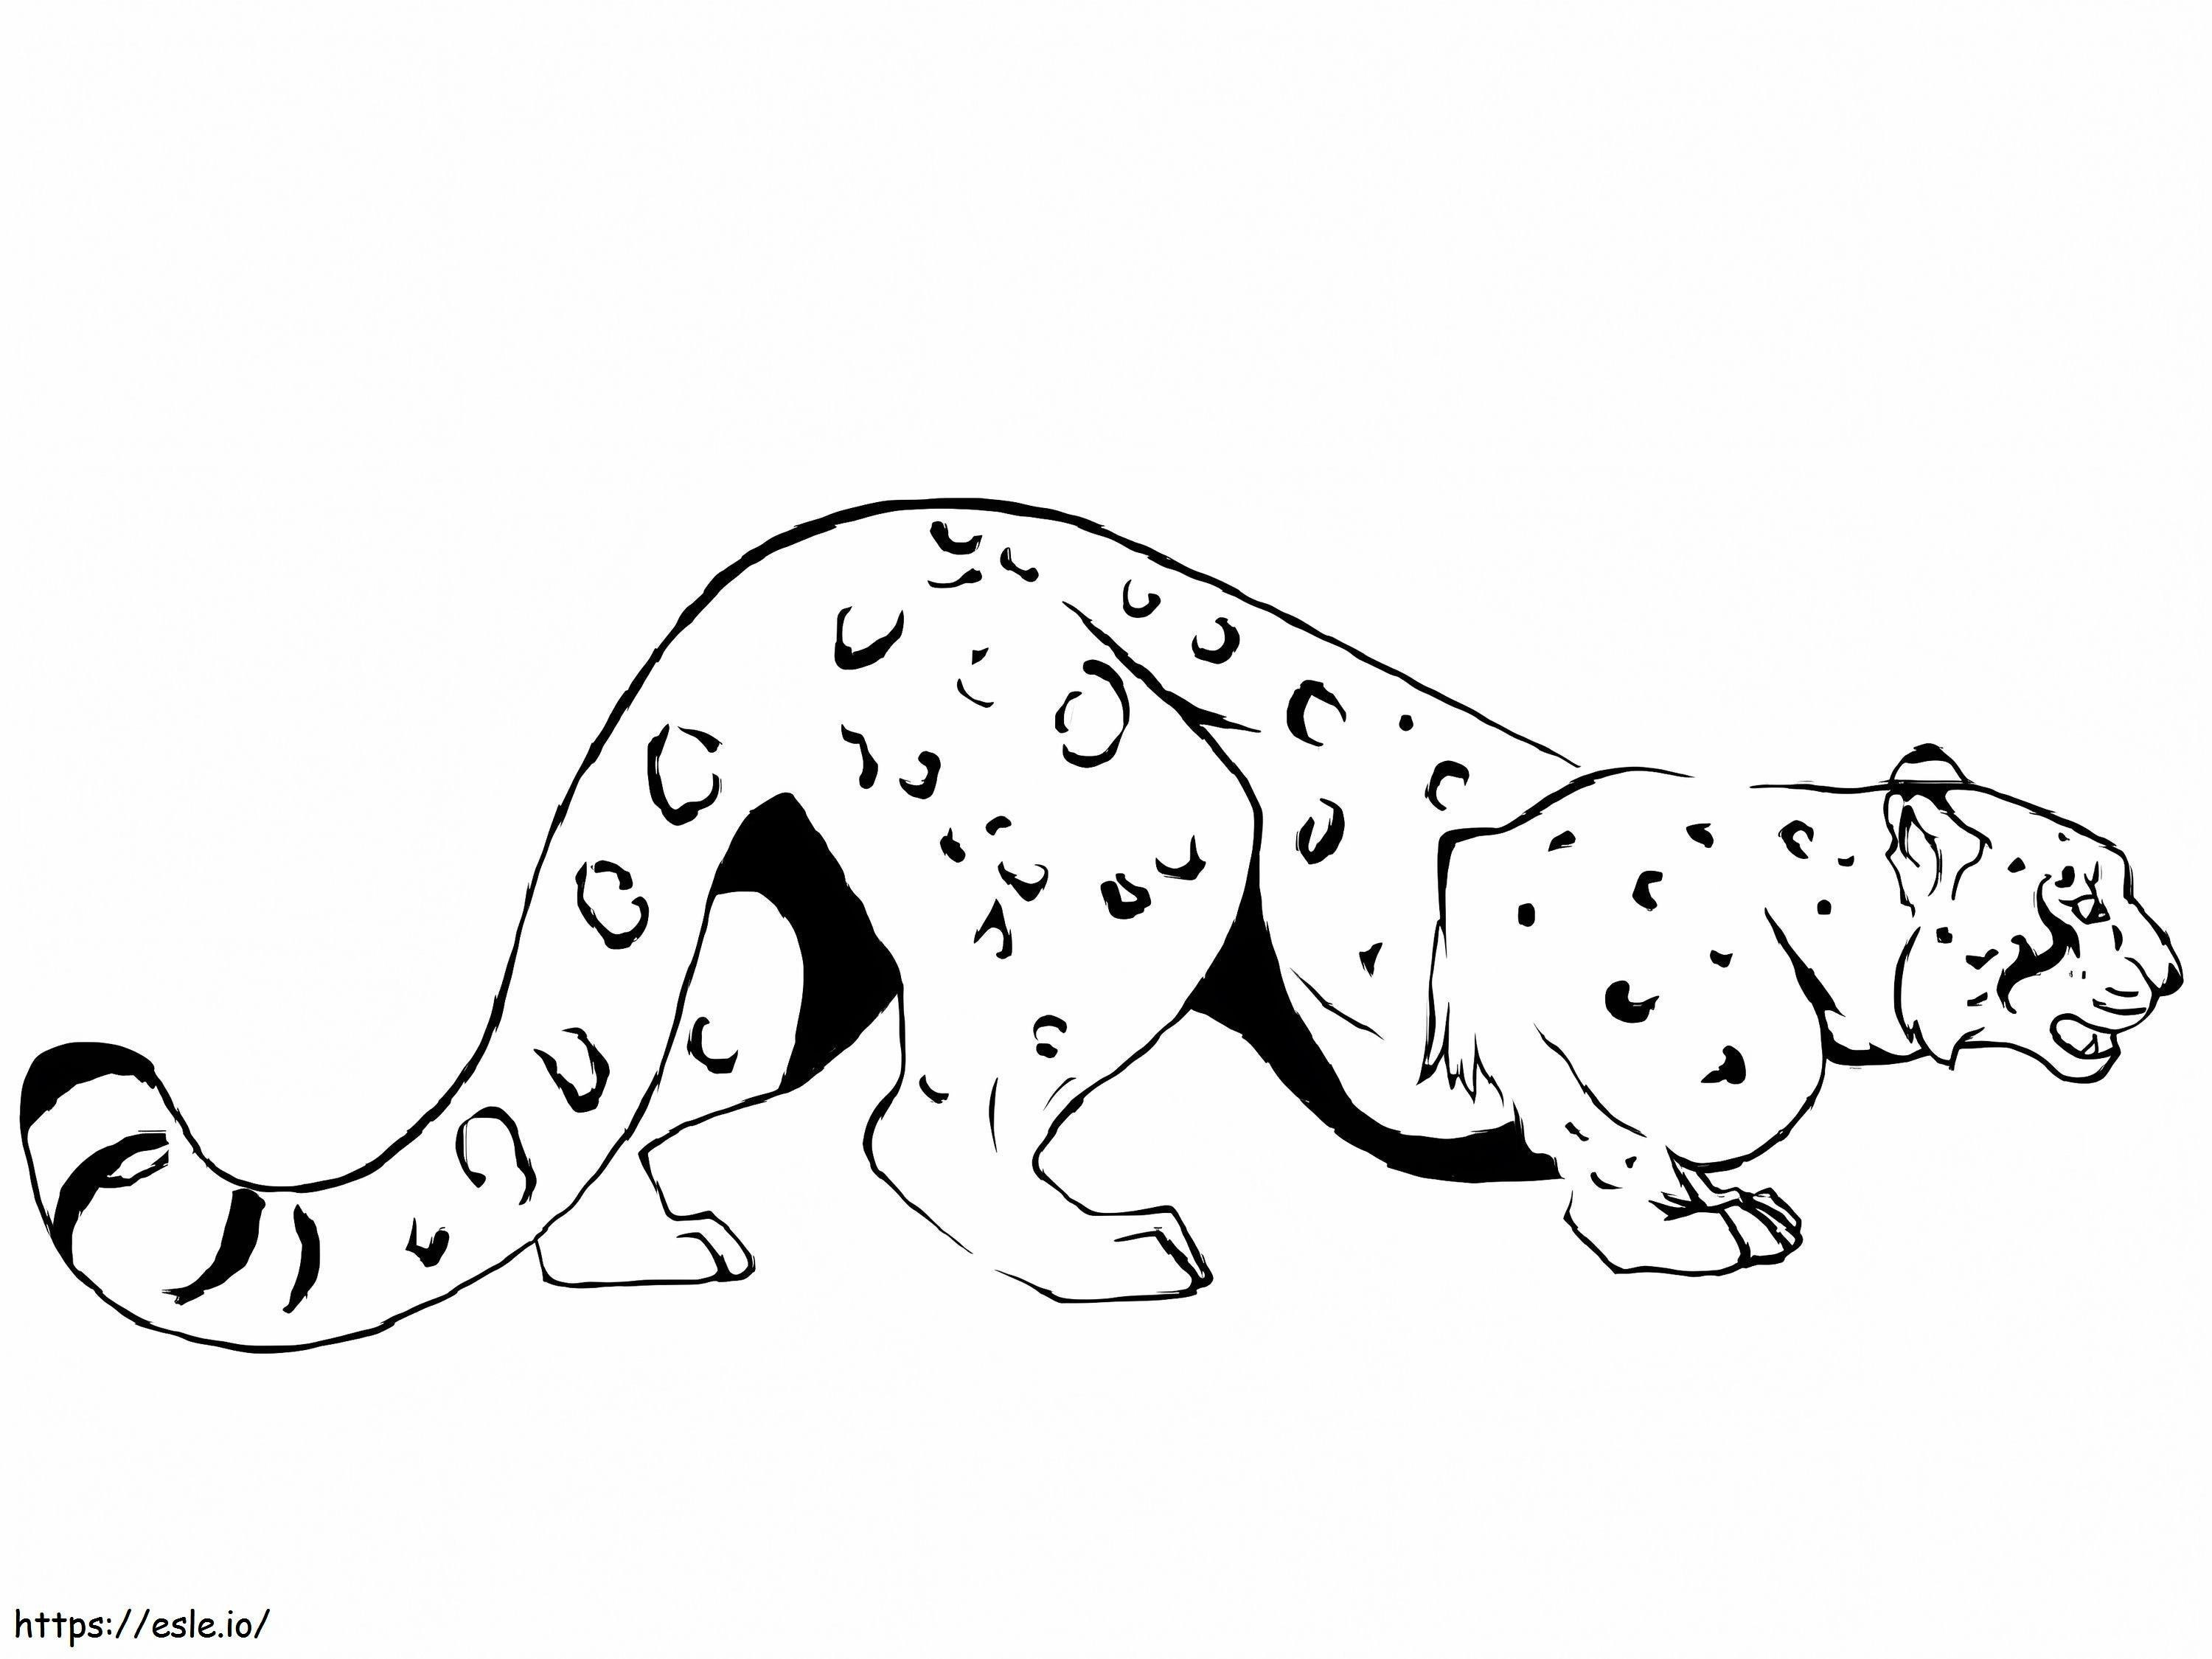 Hunting Leopard coloring page